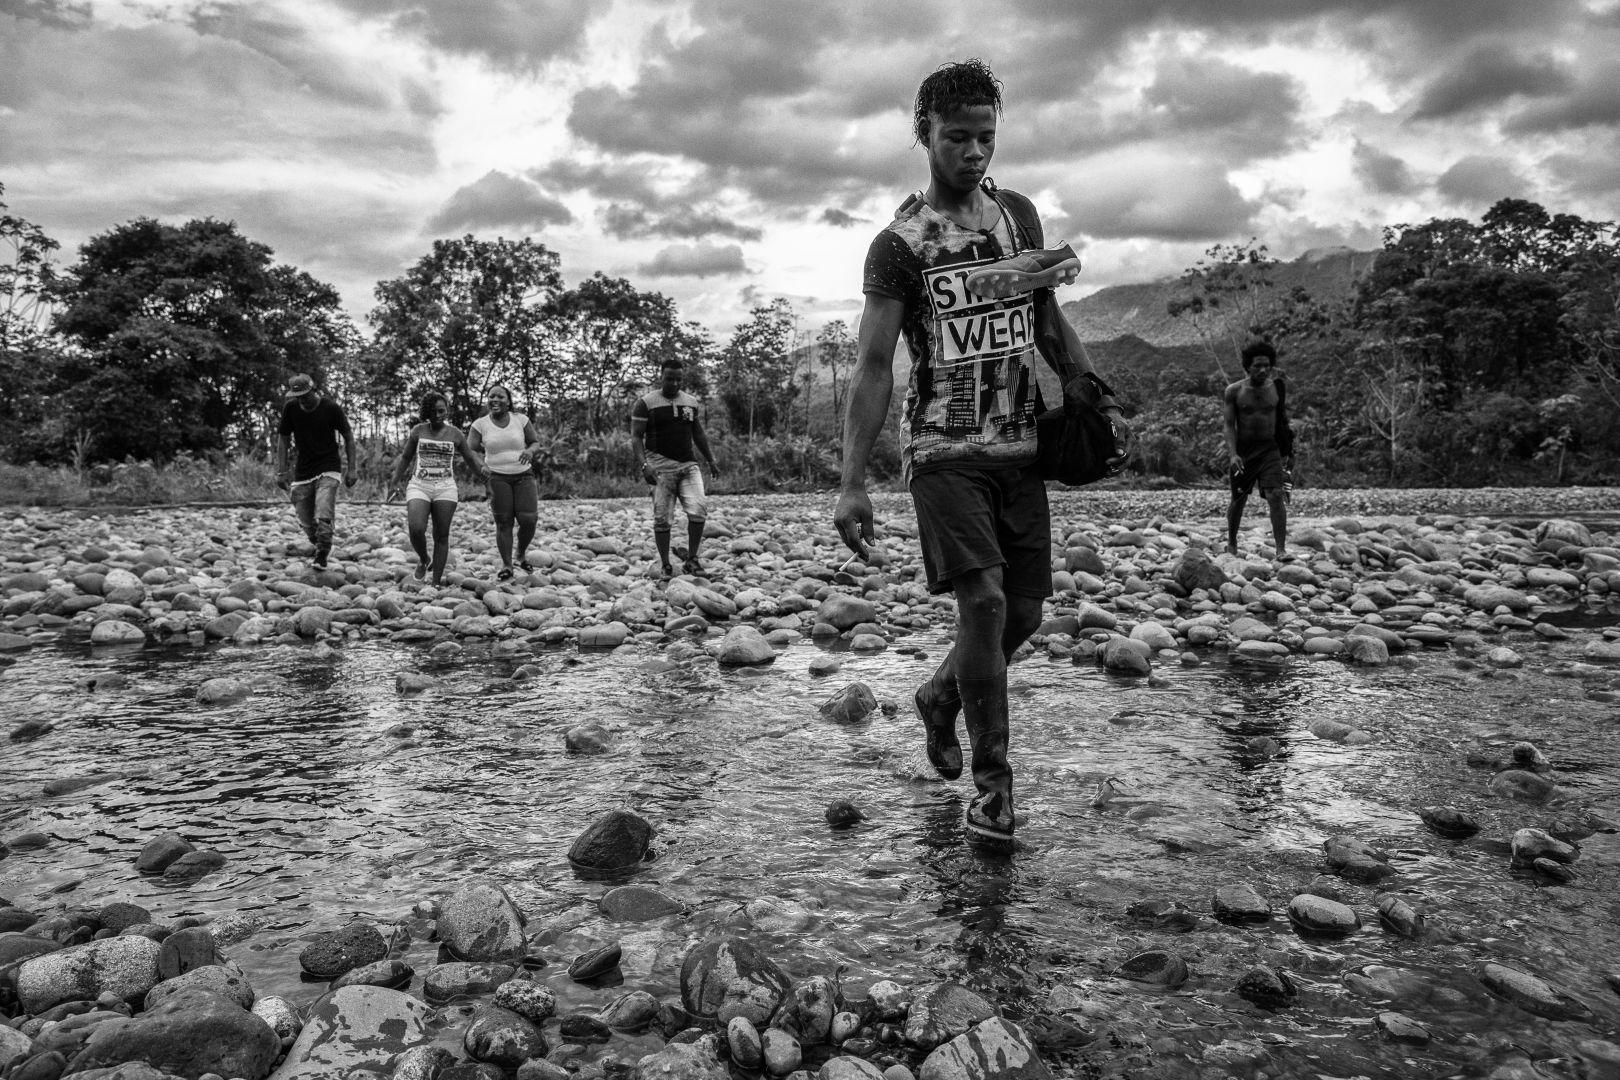 Peace Football Club, © Juan D Arredondo, Colombia, 2nd prize stories, World Press Photo Contest